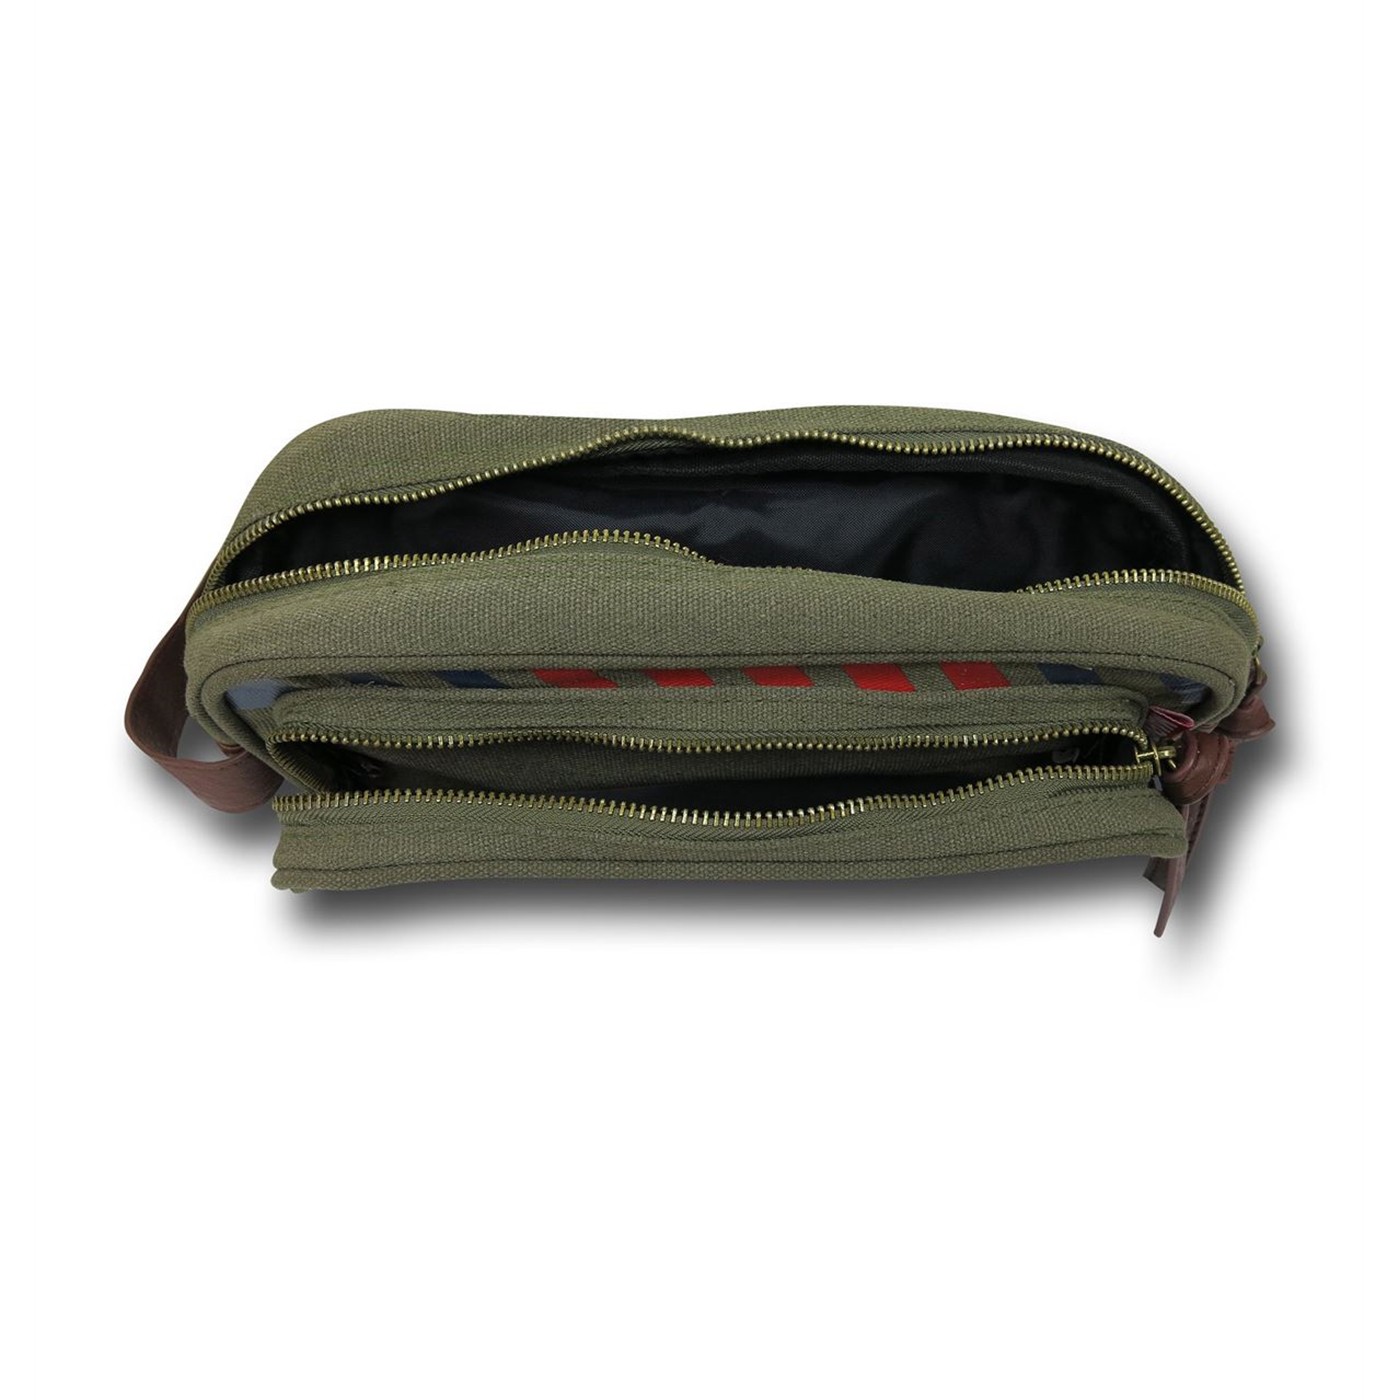 Captain America Military Green Canvas Toiletry Bag